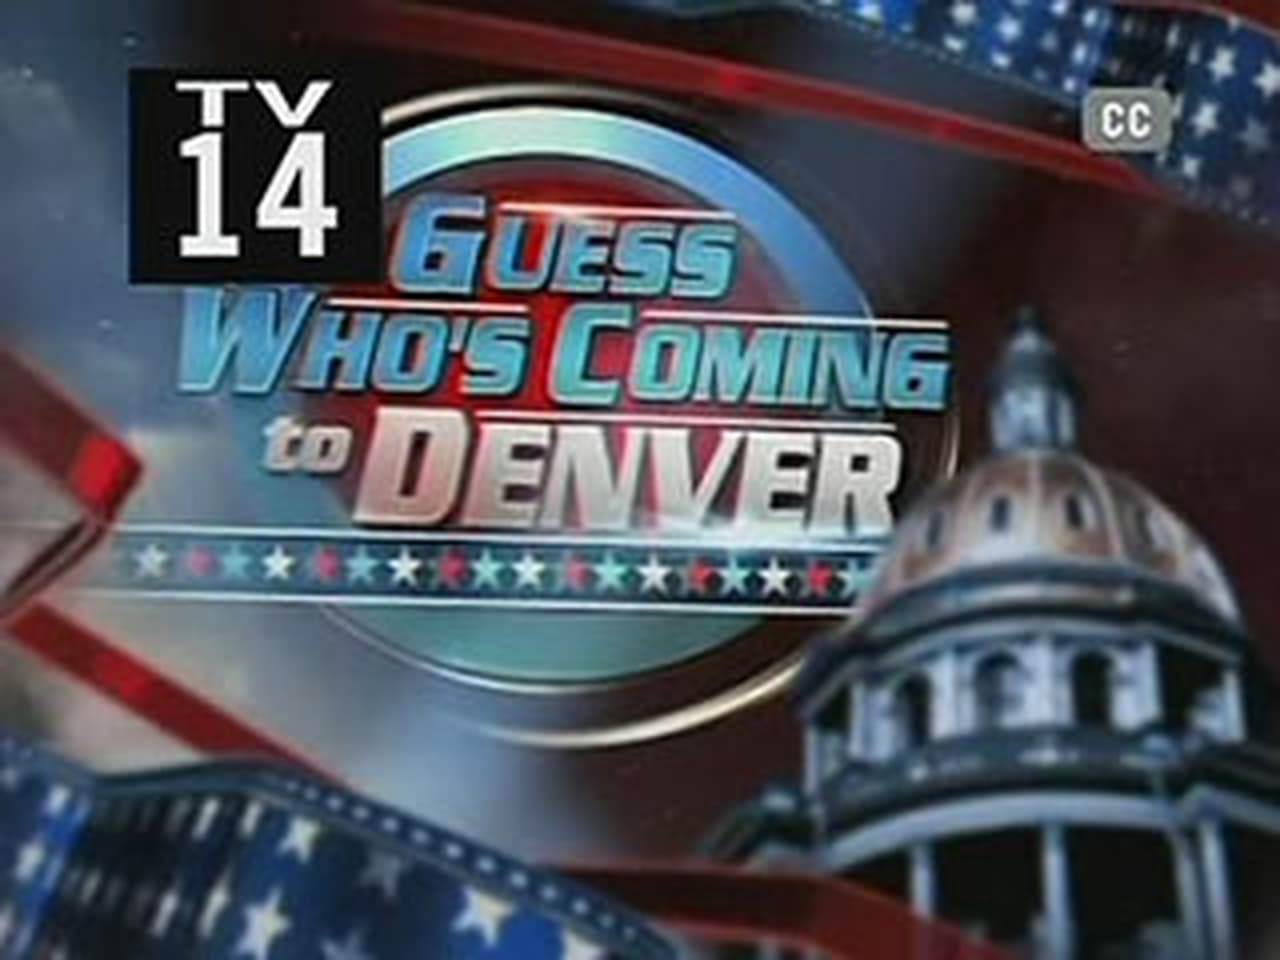 The Daily Show - Season 13 Episode 107 : Guess Who's Coming to Denver pt.1 (Gov. Tim Kaine)